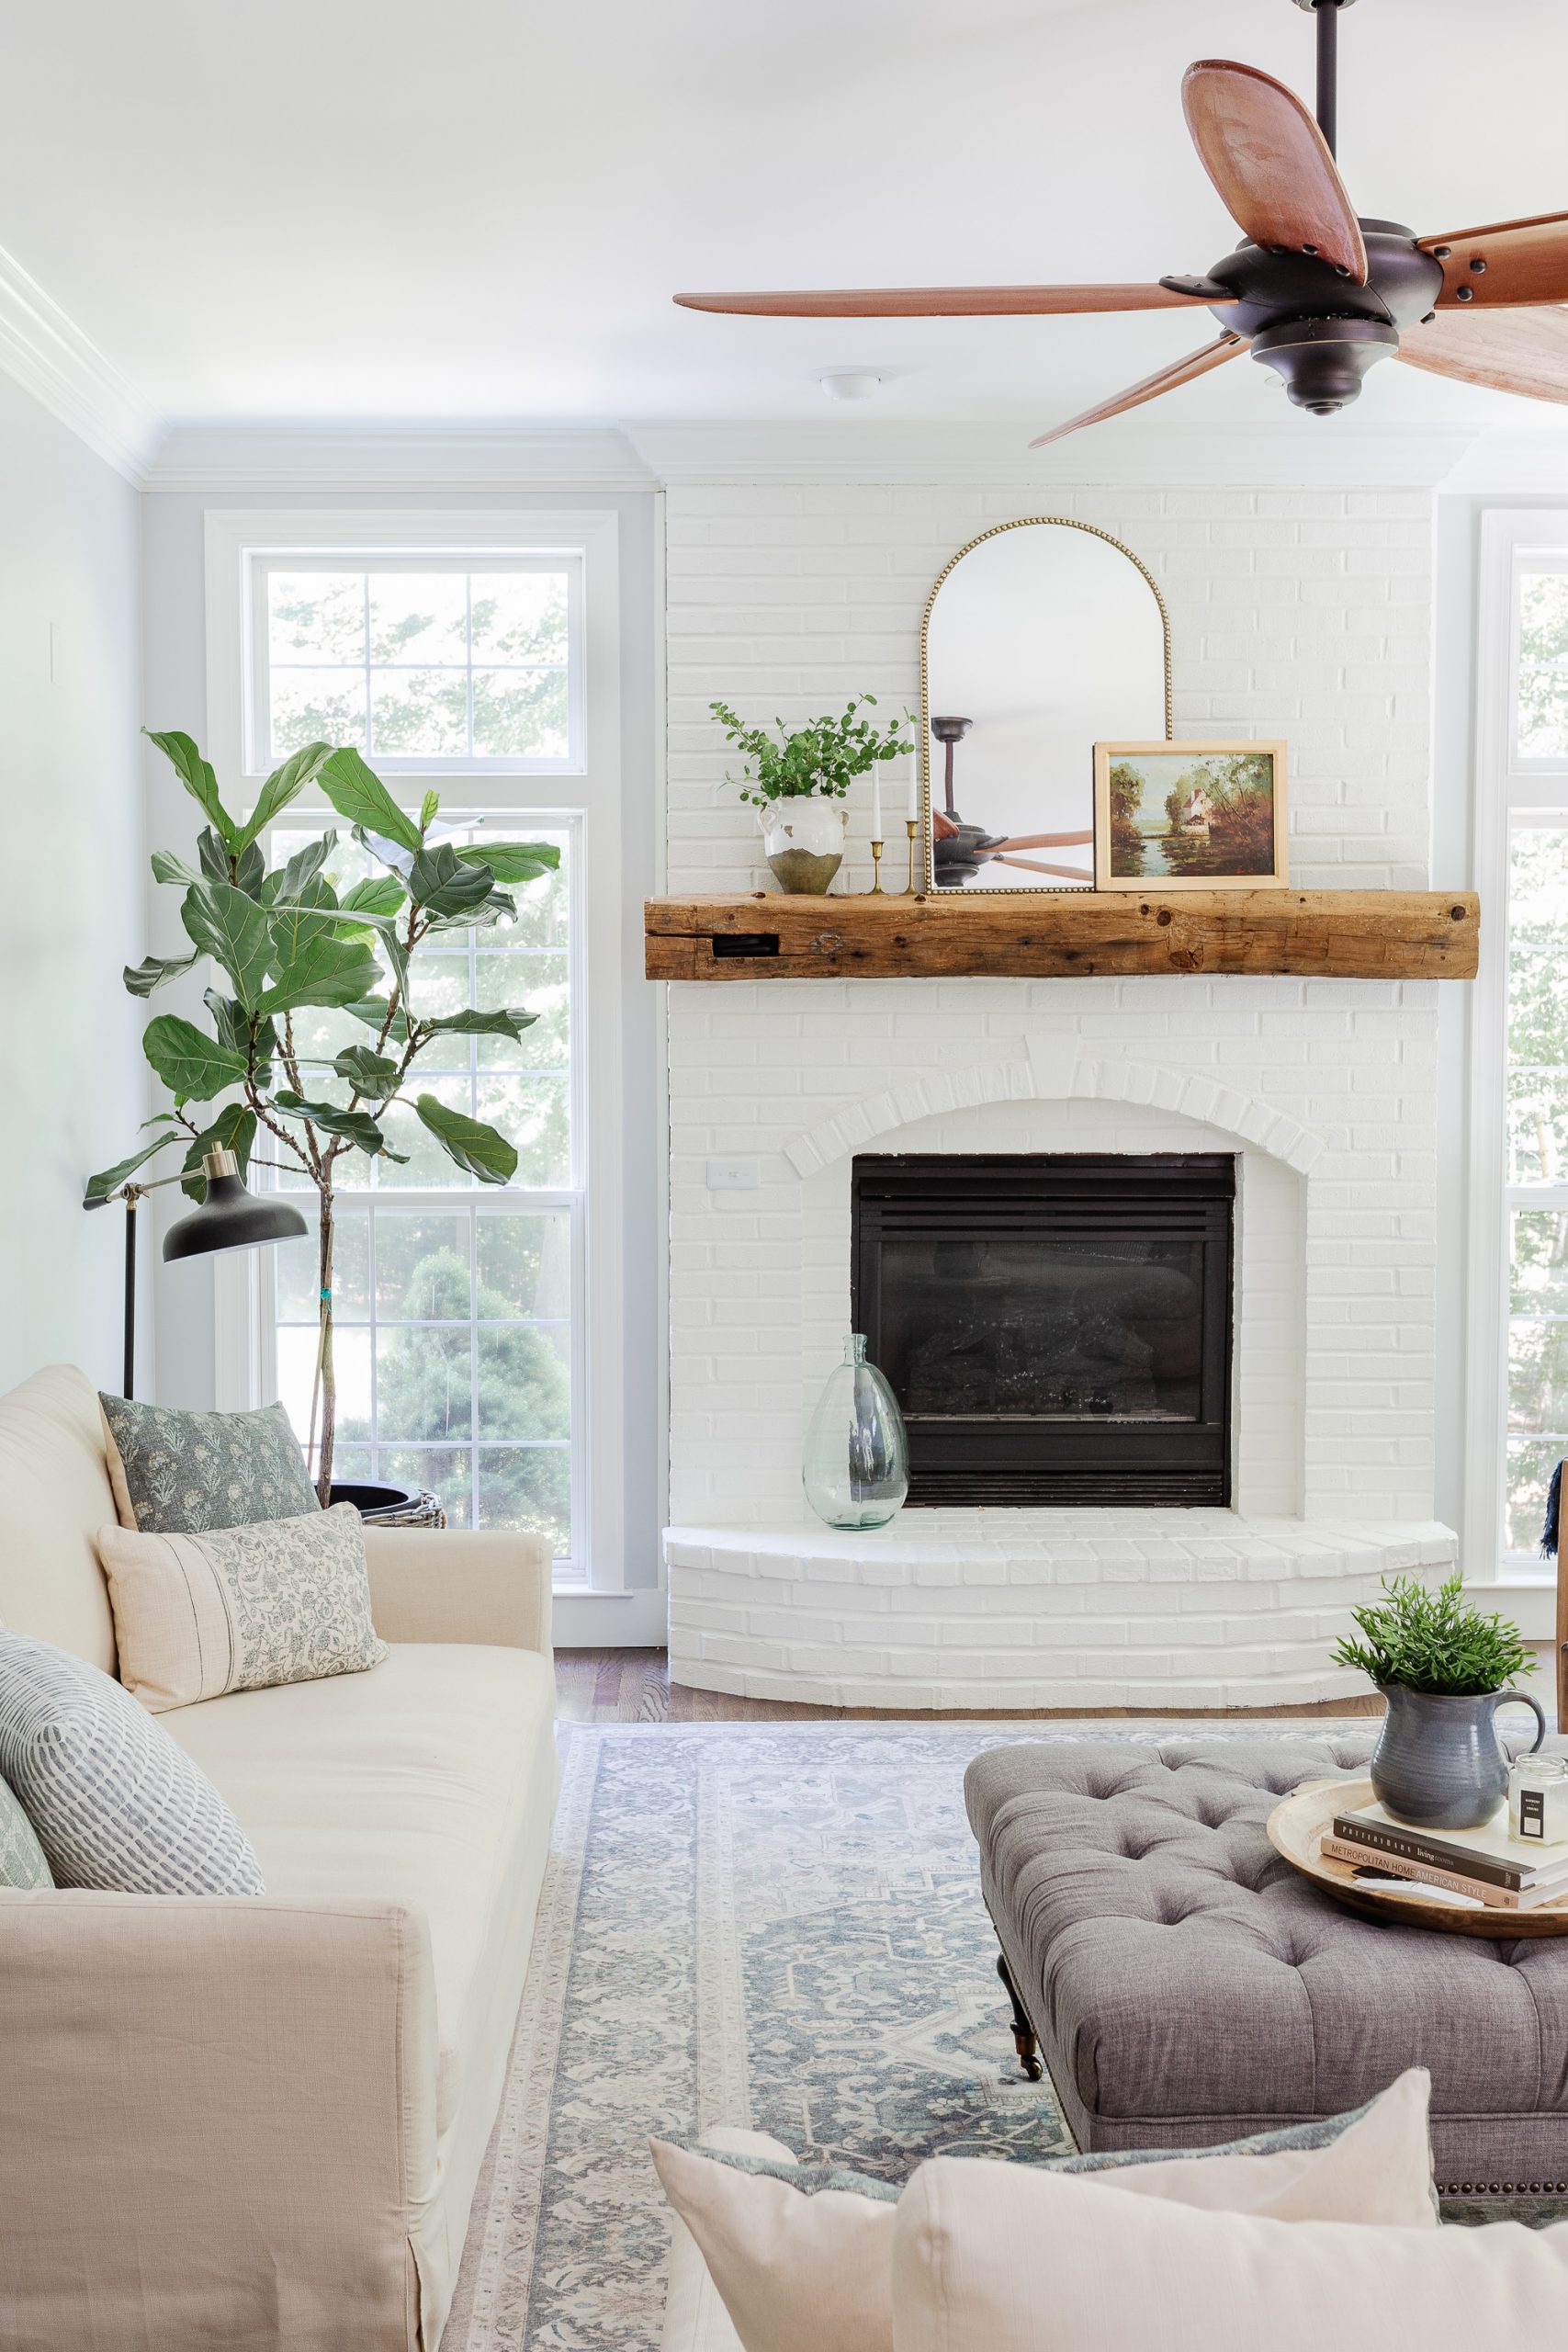 painted white brick fireplace in family room with ceiling fan, sofa, fiddle leaf tree next to window in corner. 